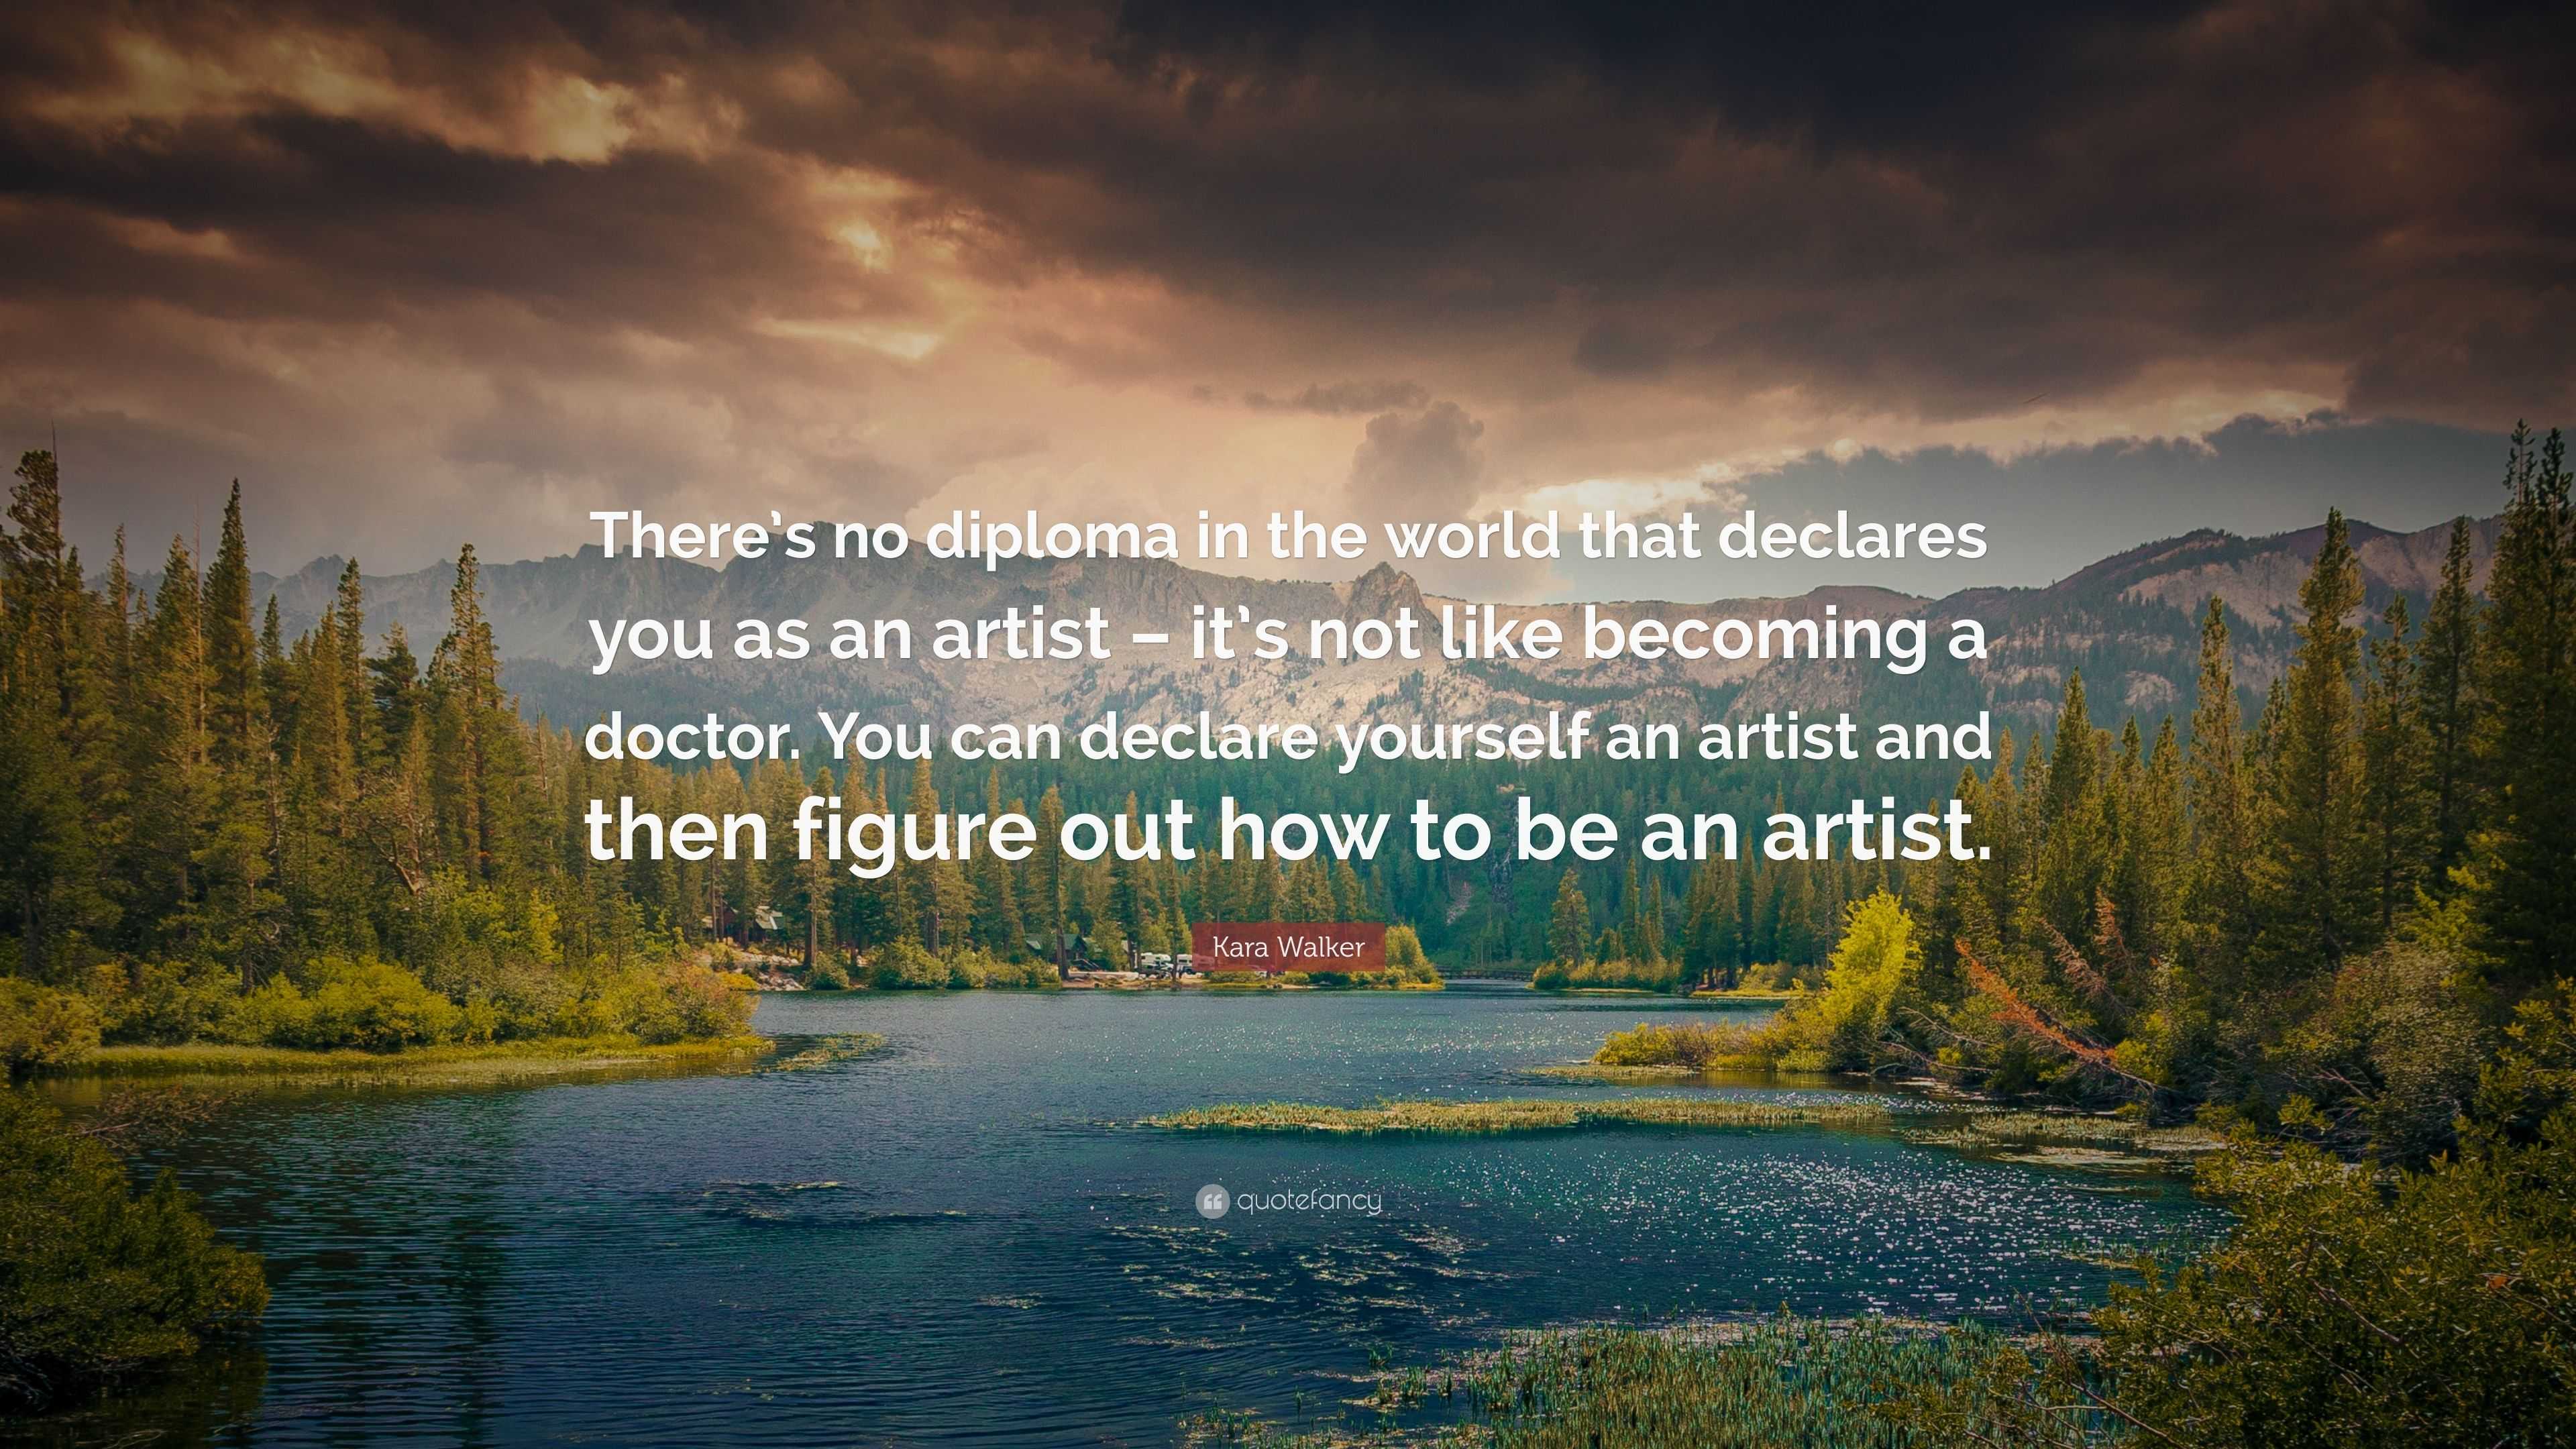 Kara Walker Quote: “There’s no diploma in the world that declares you ...